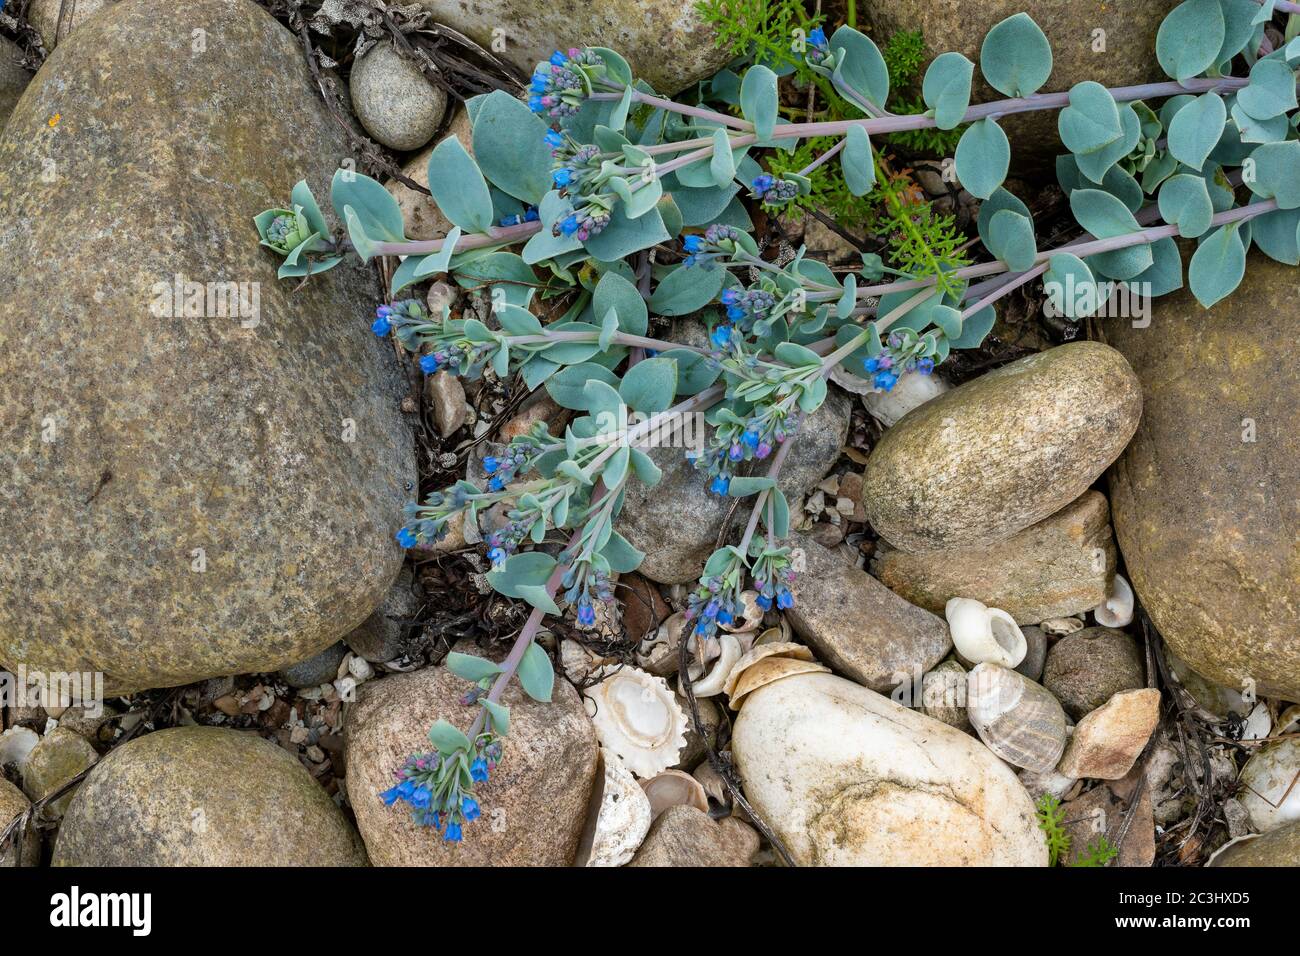 OYSTERPLANT Mertensia maritima SMALL BLUE GREEN PLANT AND STEMS WITH BRIGHT BLUE FLOWERS ON A SEASHELL AND ROCK COVERED BEACH THE MORAY COAST SCOTLAND Stock Photo